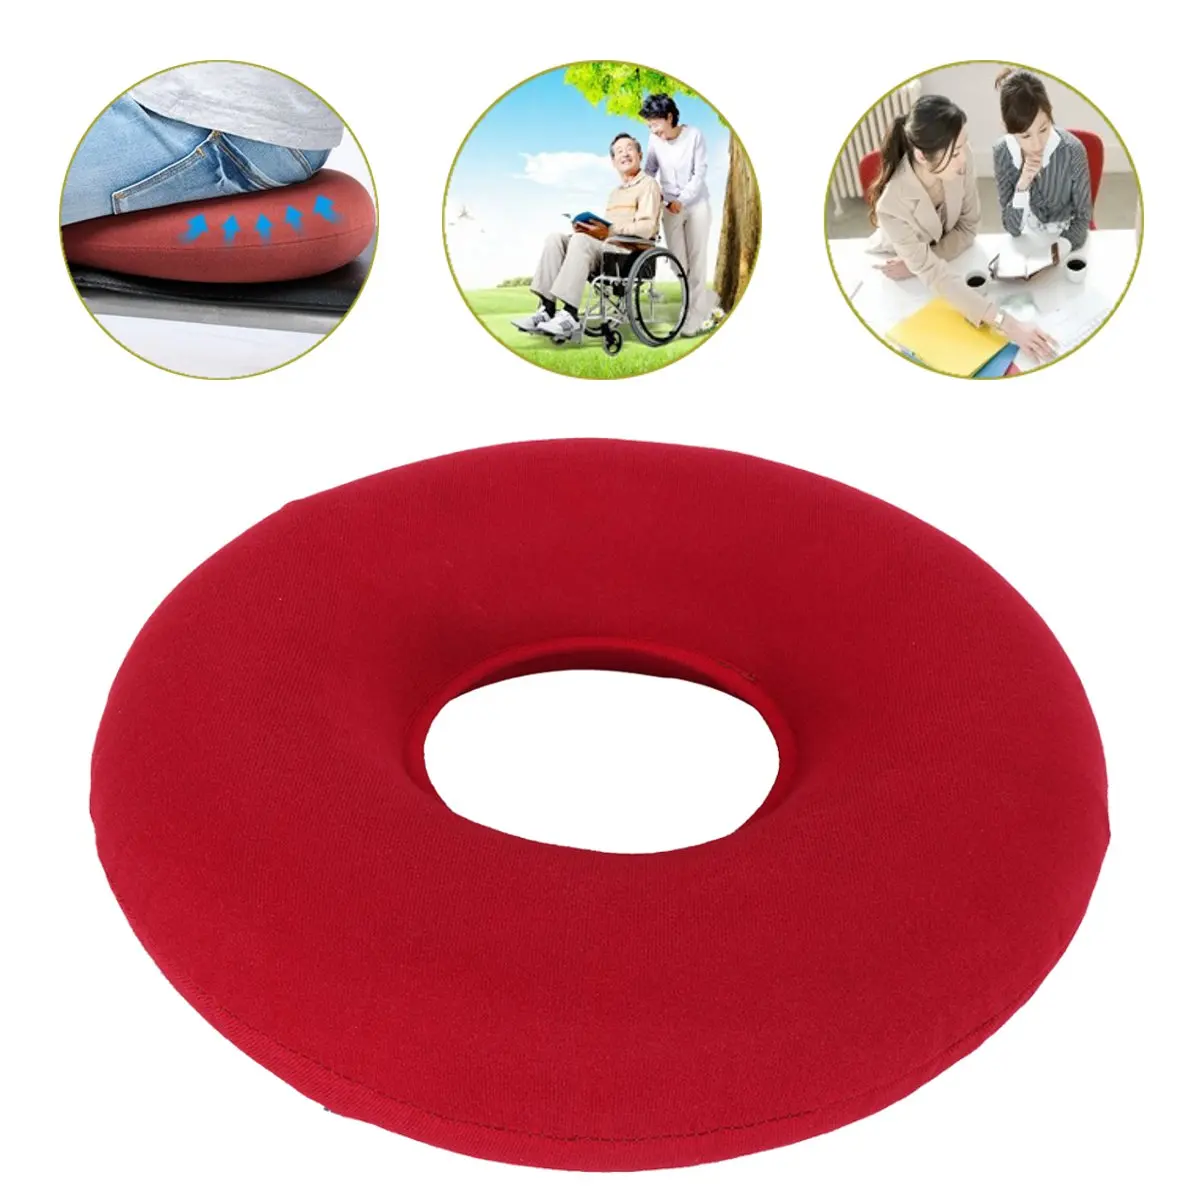 1pc Donut Pillow For Tailbone Pain, Inflatable Donut Cushion Seat With A  Pump, Seat Cushion For Hemorrhoids, Bed Sores, Prostatitis, Round  Wheelchairs